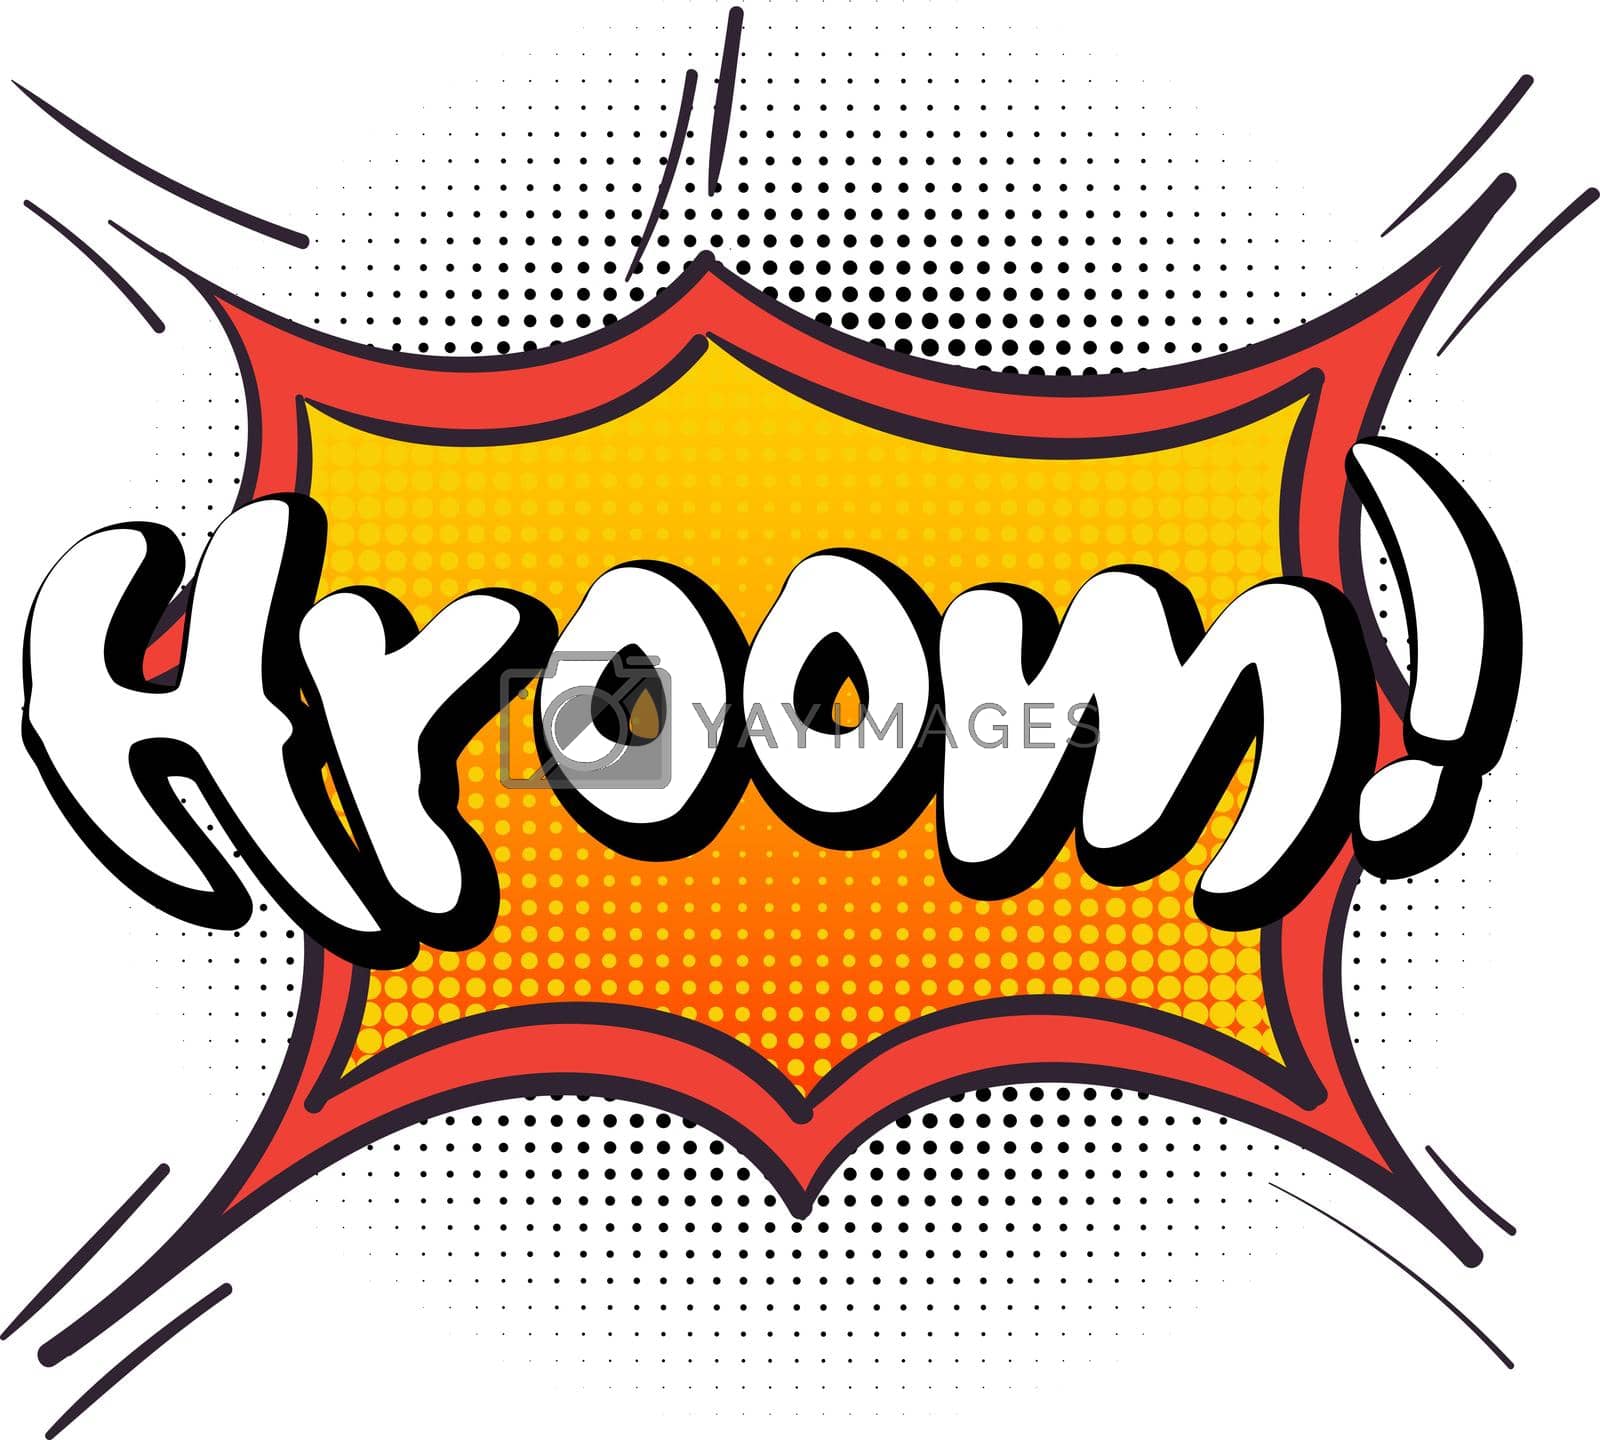 Royalty free image of Hroom. Comic balloon with text. Loud sound symbol by ONYXprj